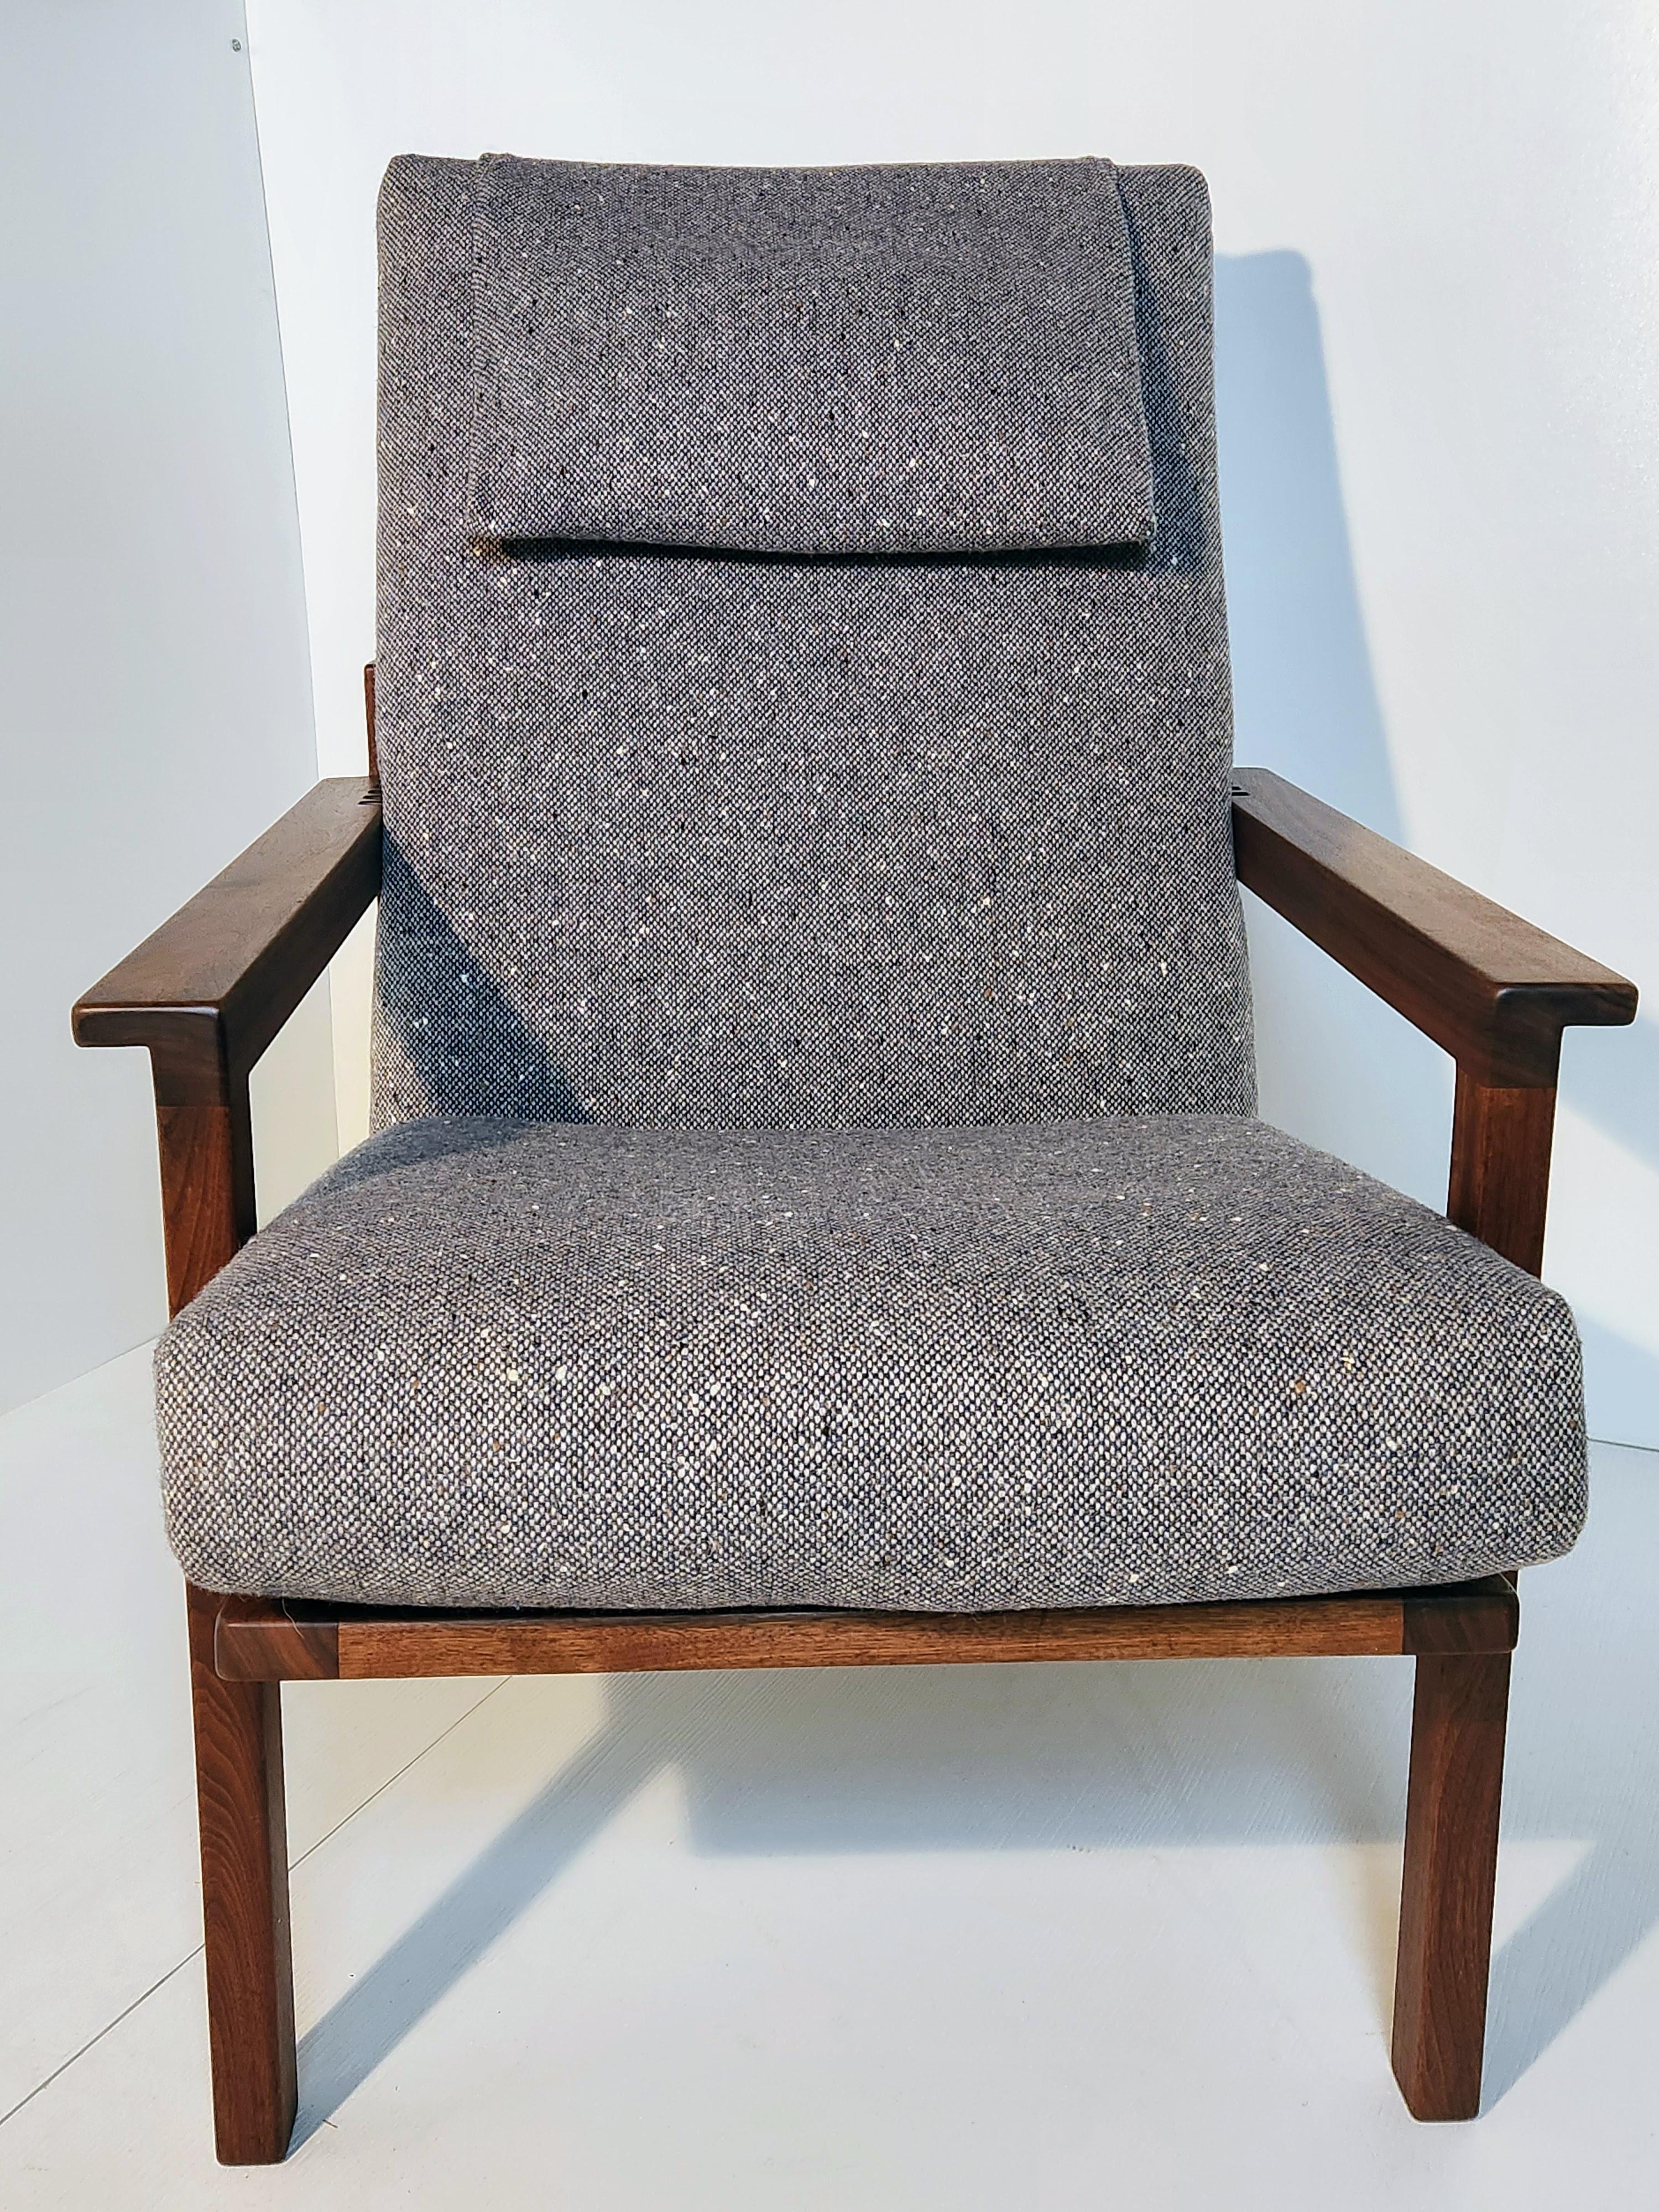 Walnut Adjustable Lounge Chair Arden Riddle (1921-2011) pre-1965 For Sale 2